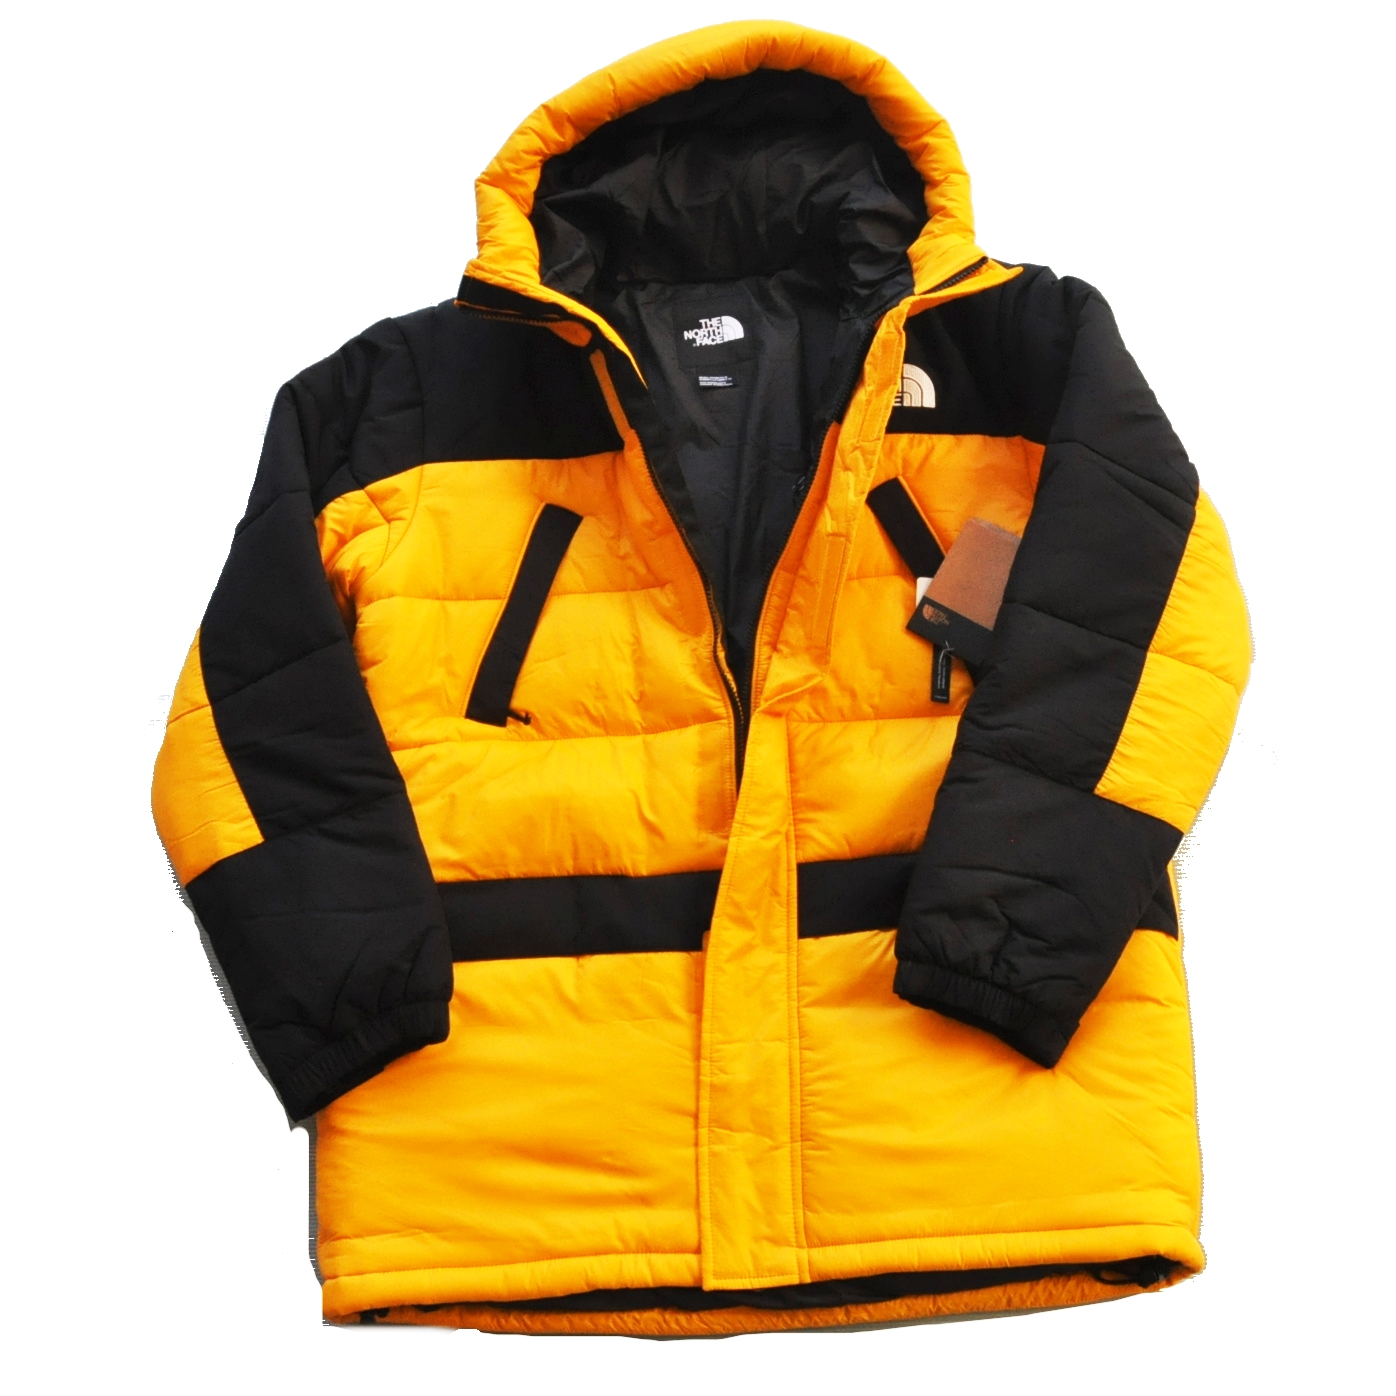 THE NORTH FACE / ザノースフェイス  HMLYN INS PAKA JACKET SUMMIT GOLD UNSEX